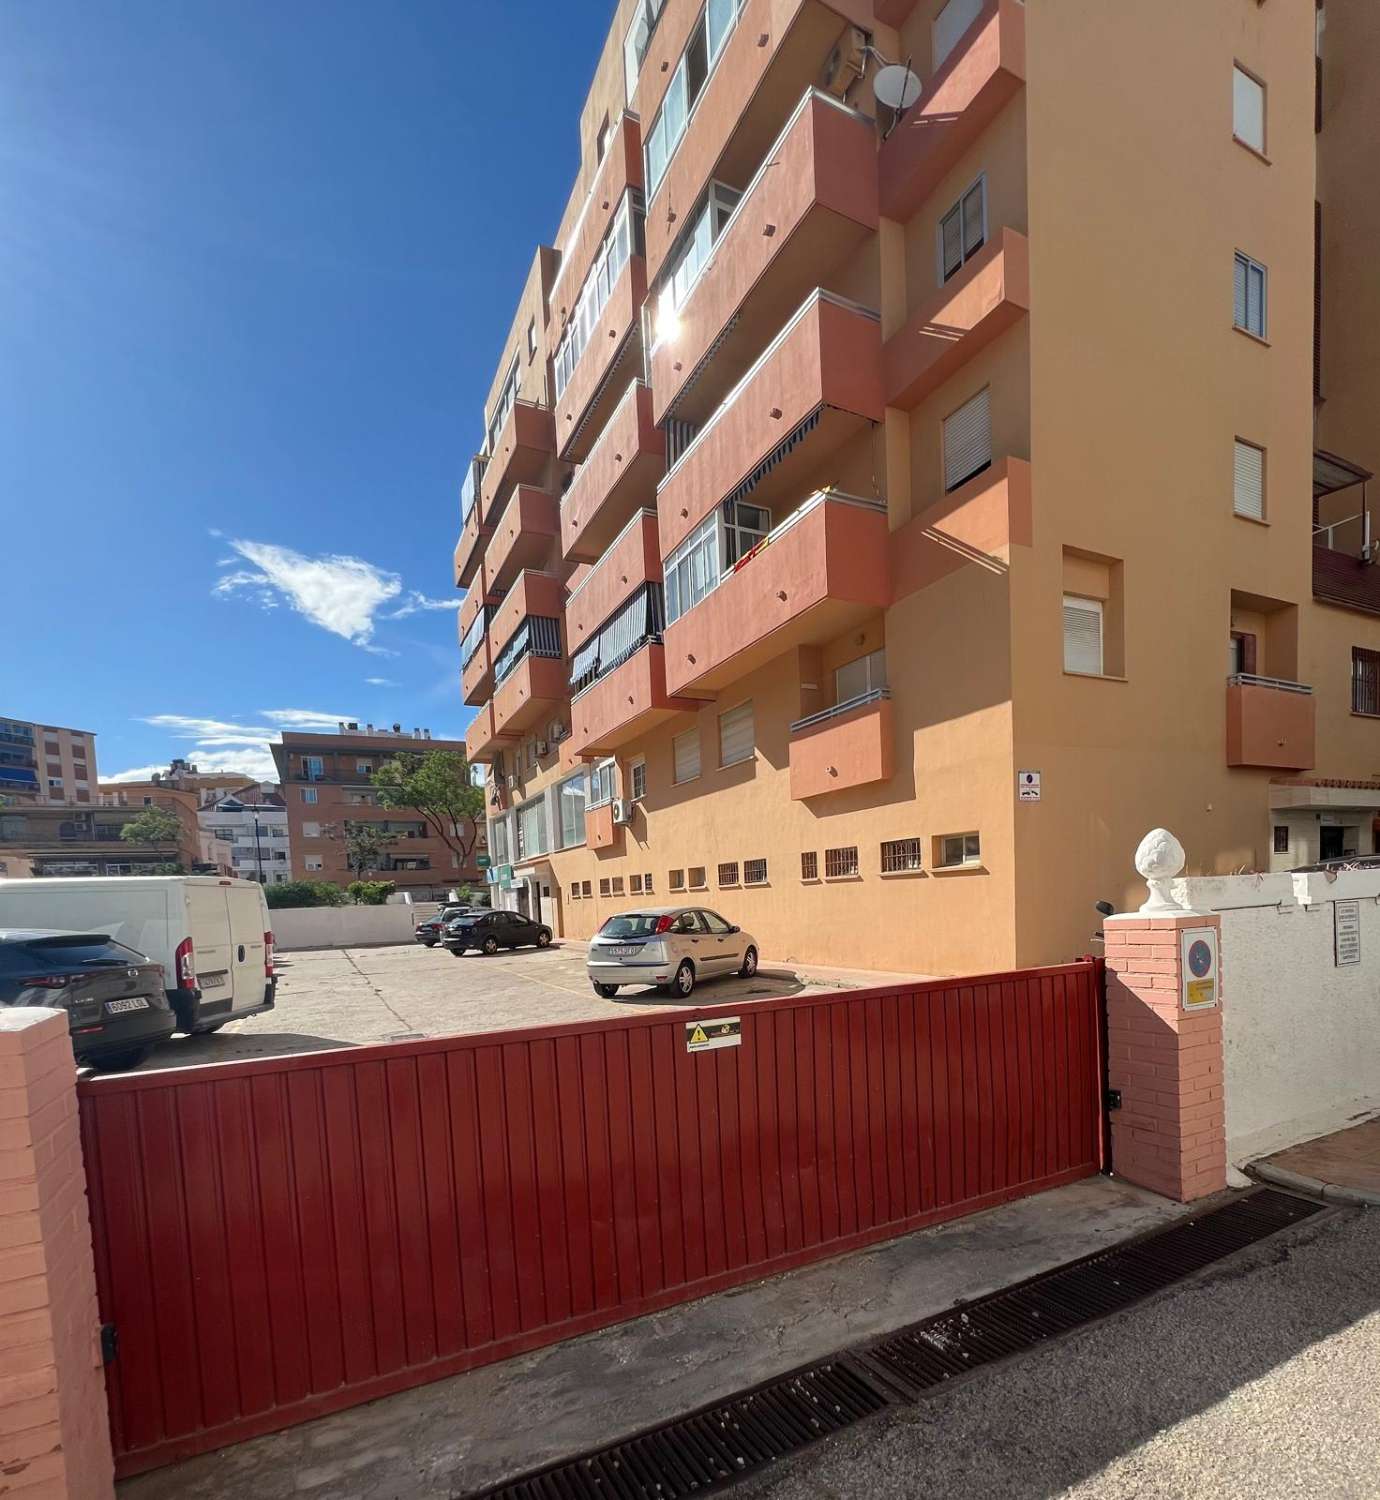 Apartment for holidays in Fuengirola